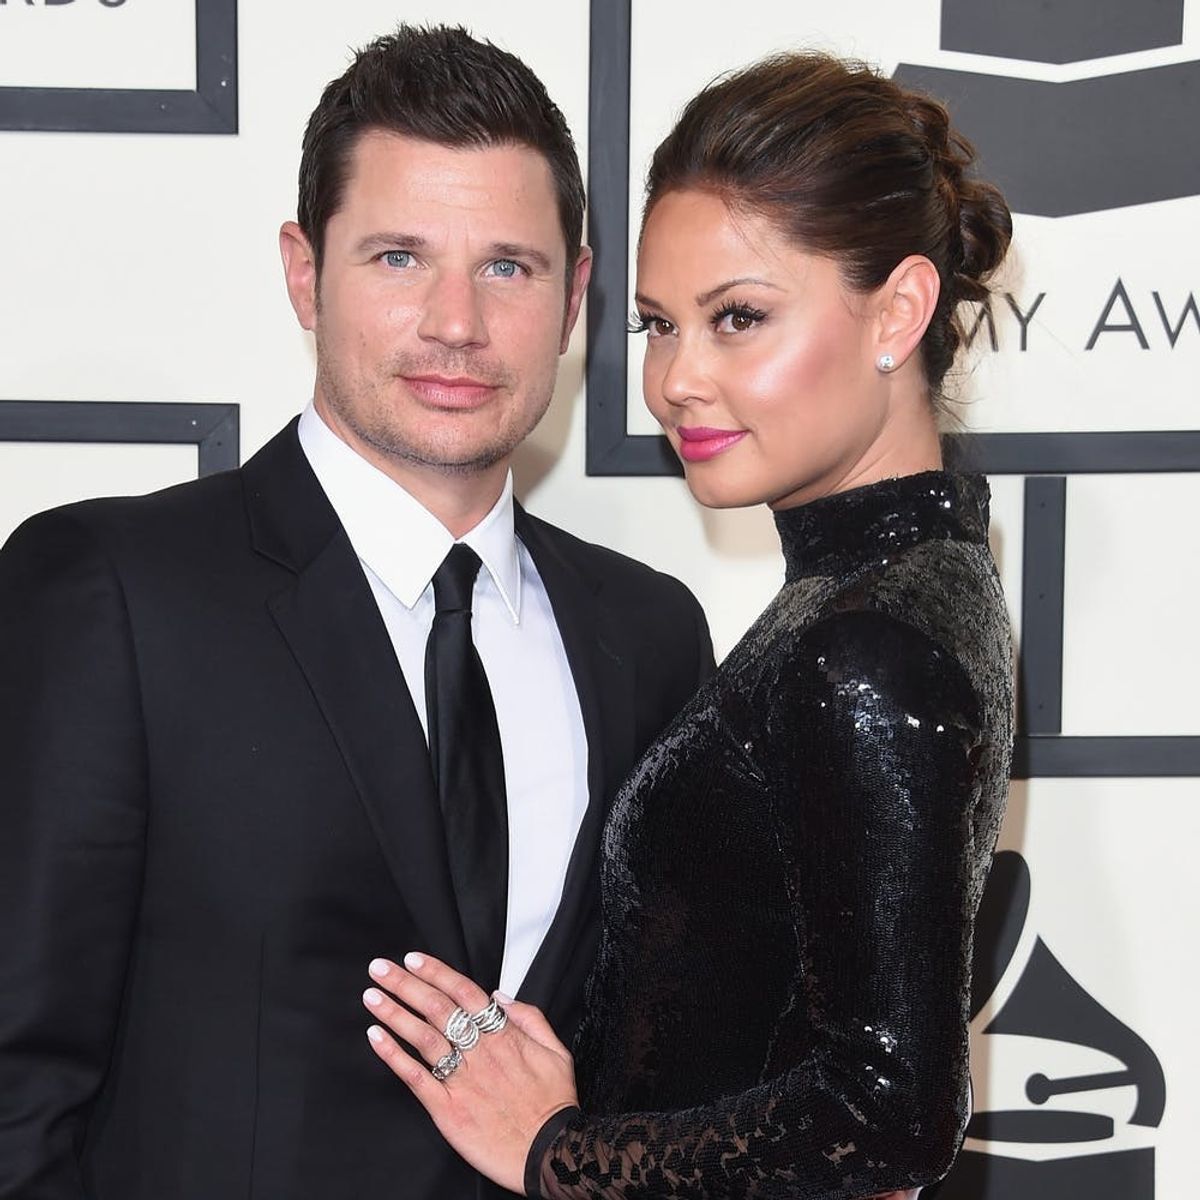 Nick Lachey Found Wife Vanessa Lachey’s Wedding Ring in the Trash